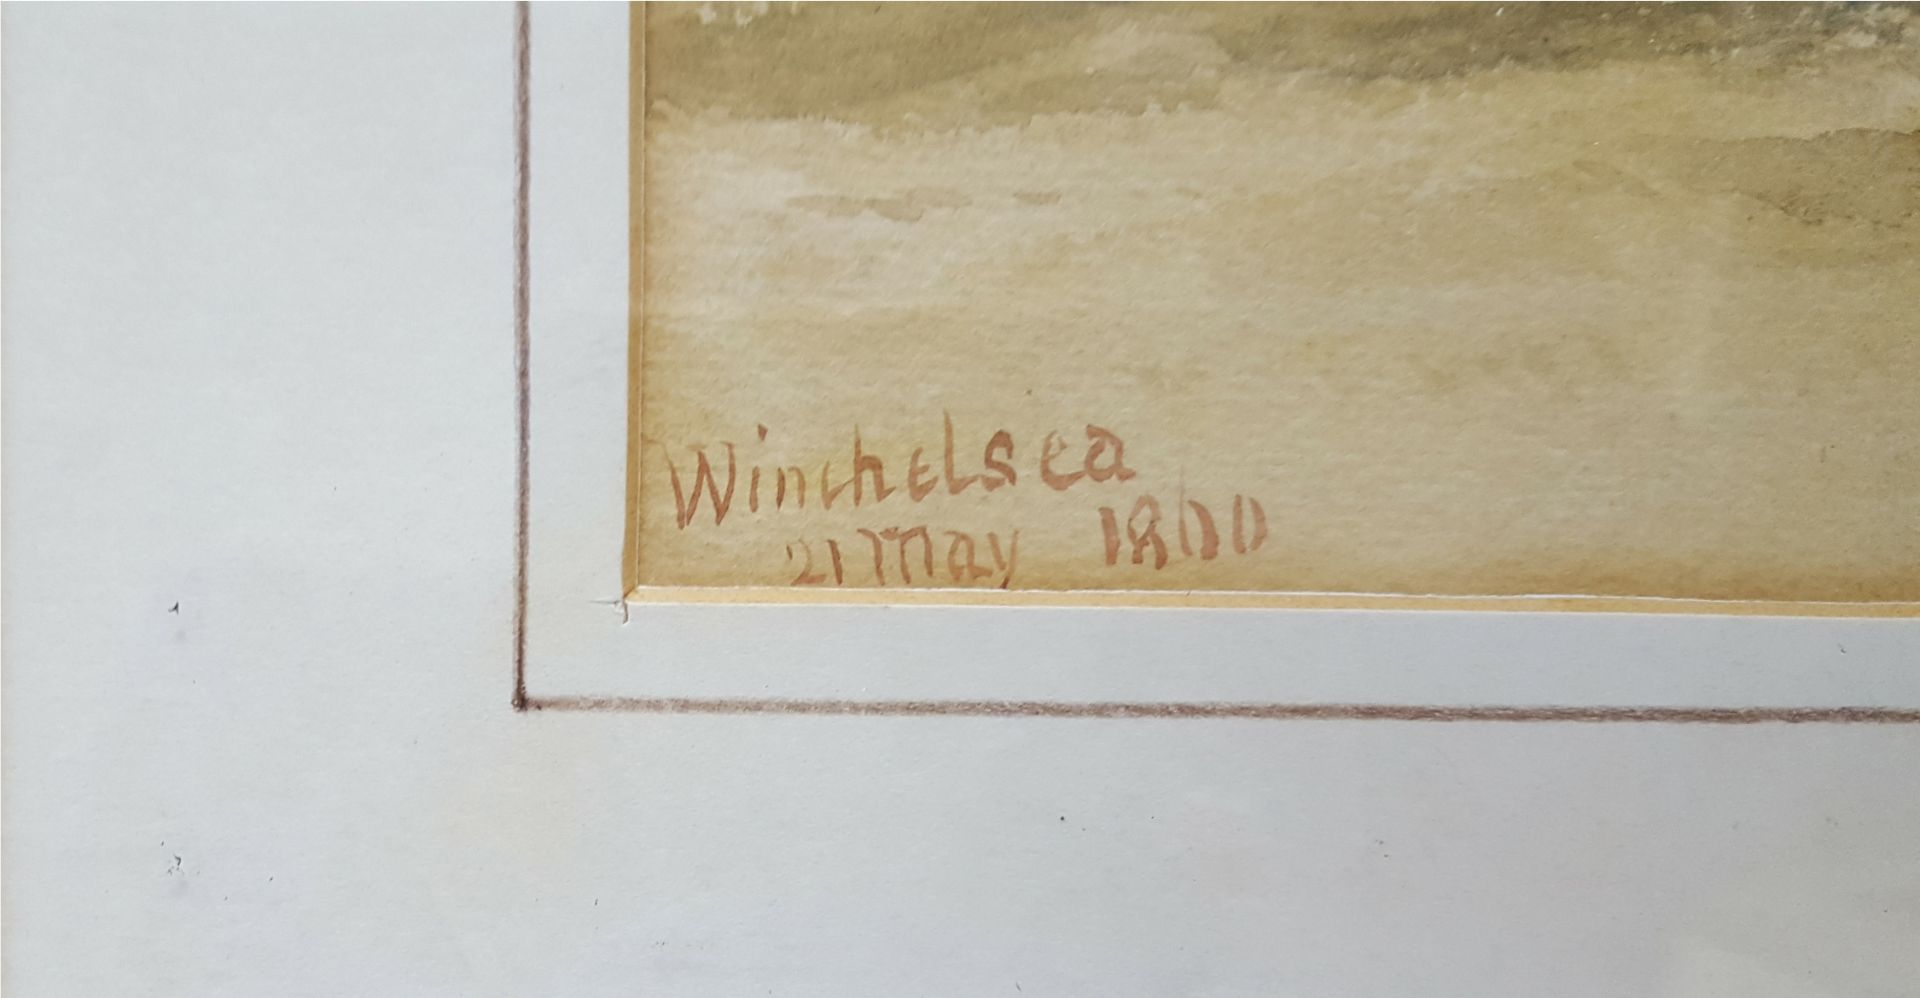 Vintage Watercolour Painting Winchelsea Church Wincheslsea. Signed Lower Left Winchelsea 21 Mat 1800 - Image 2 of 3